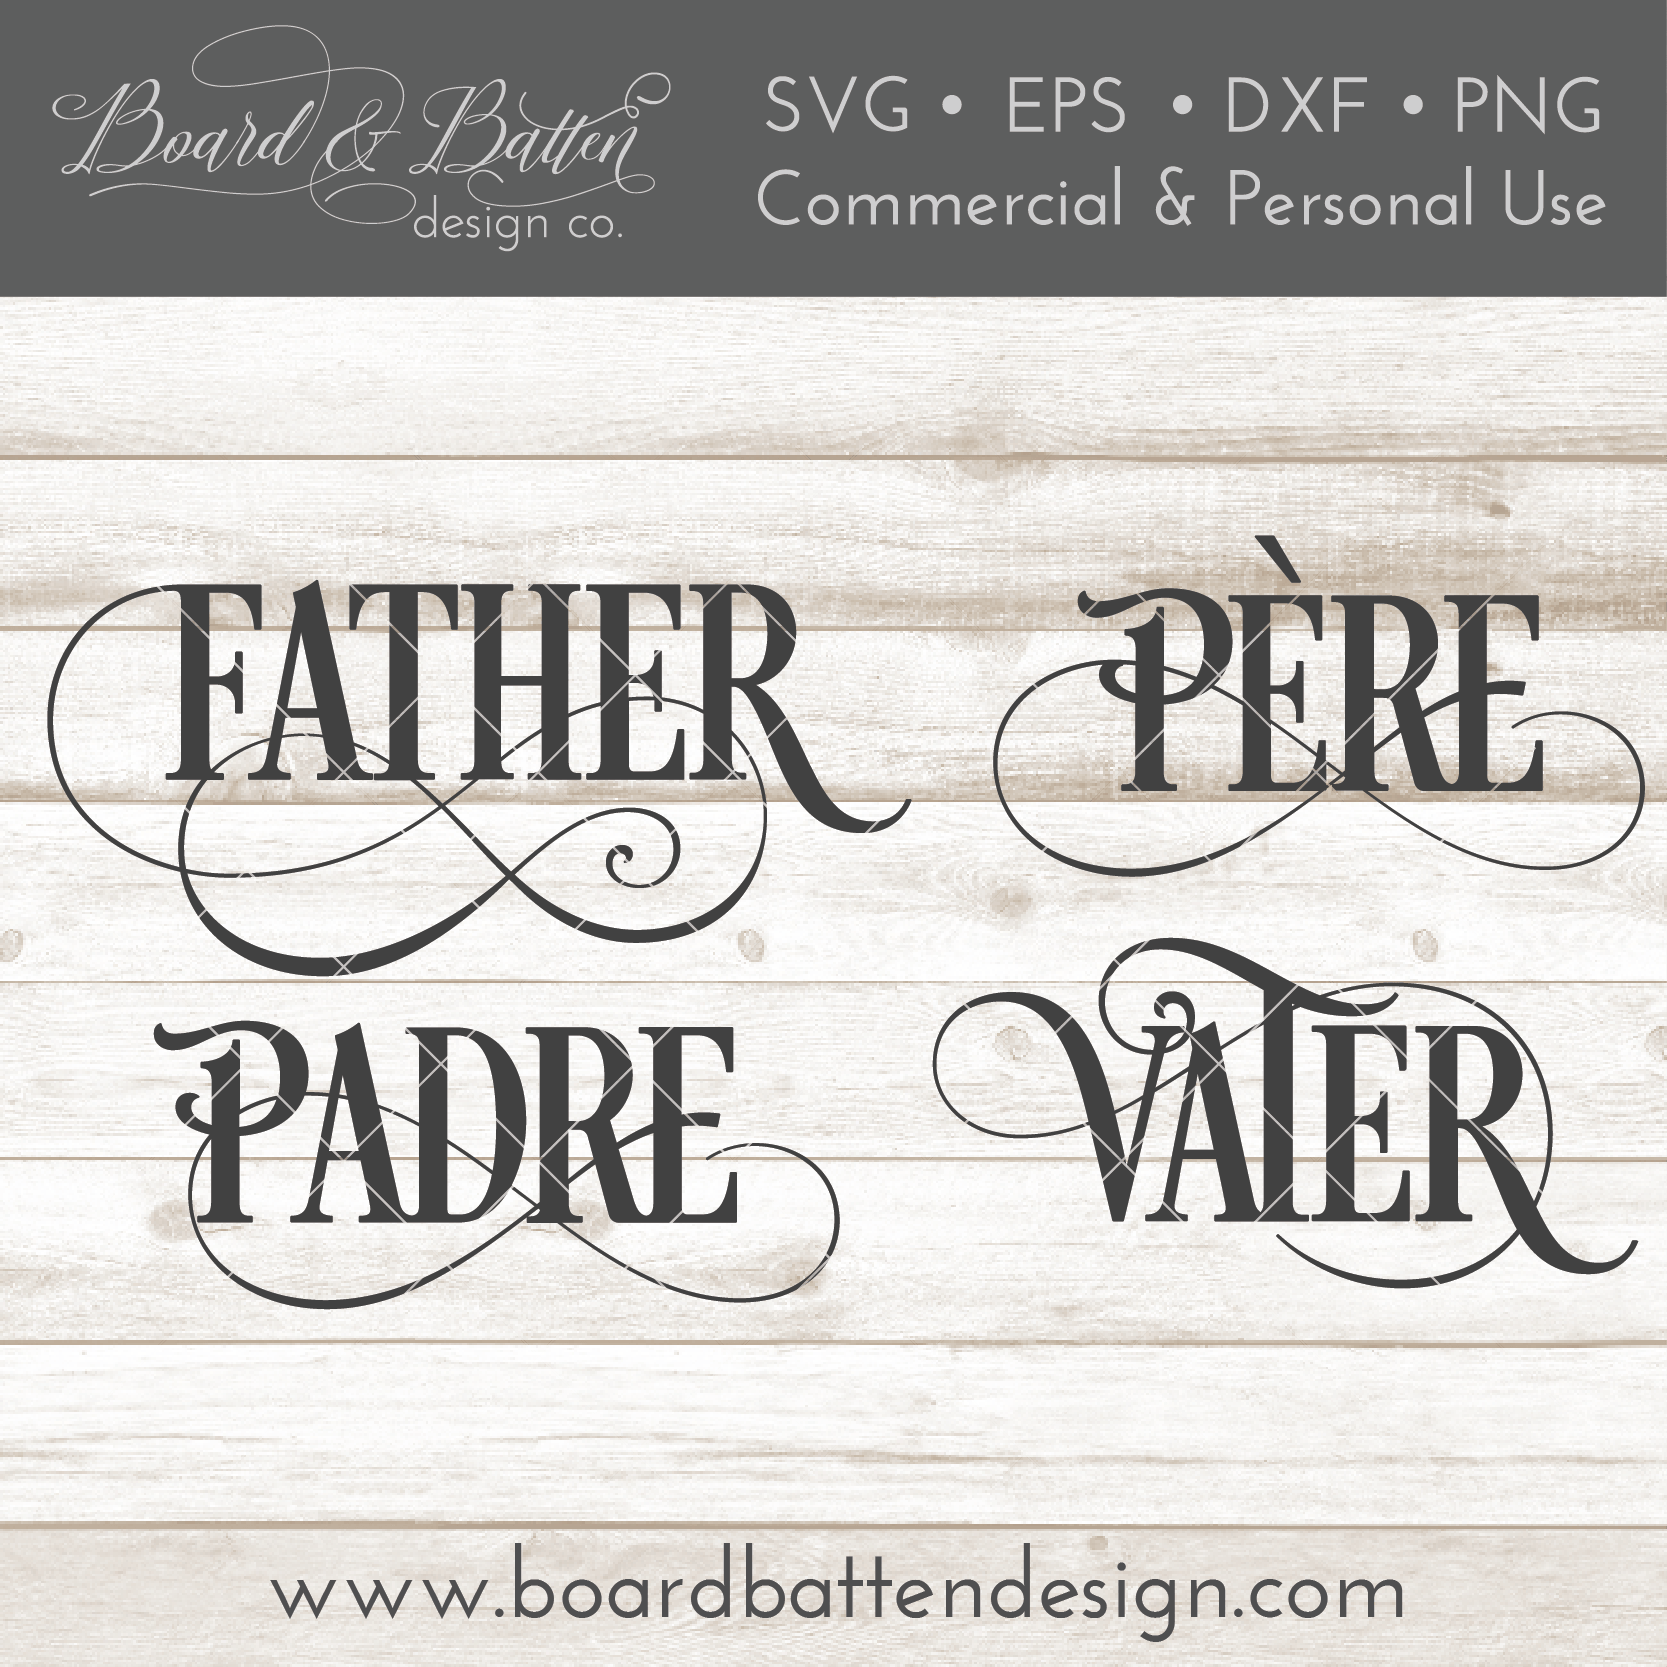 Father Padre Vater Pere SVG File - Father in 4 Languages - Commercial Use SVG Files for Cricut & Silhouette